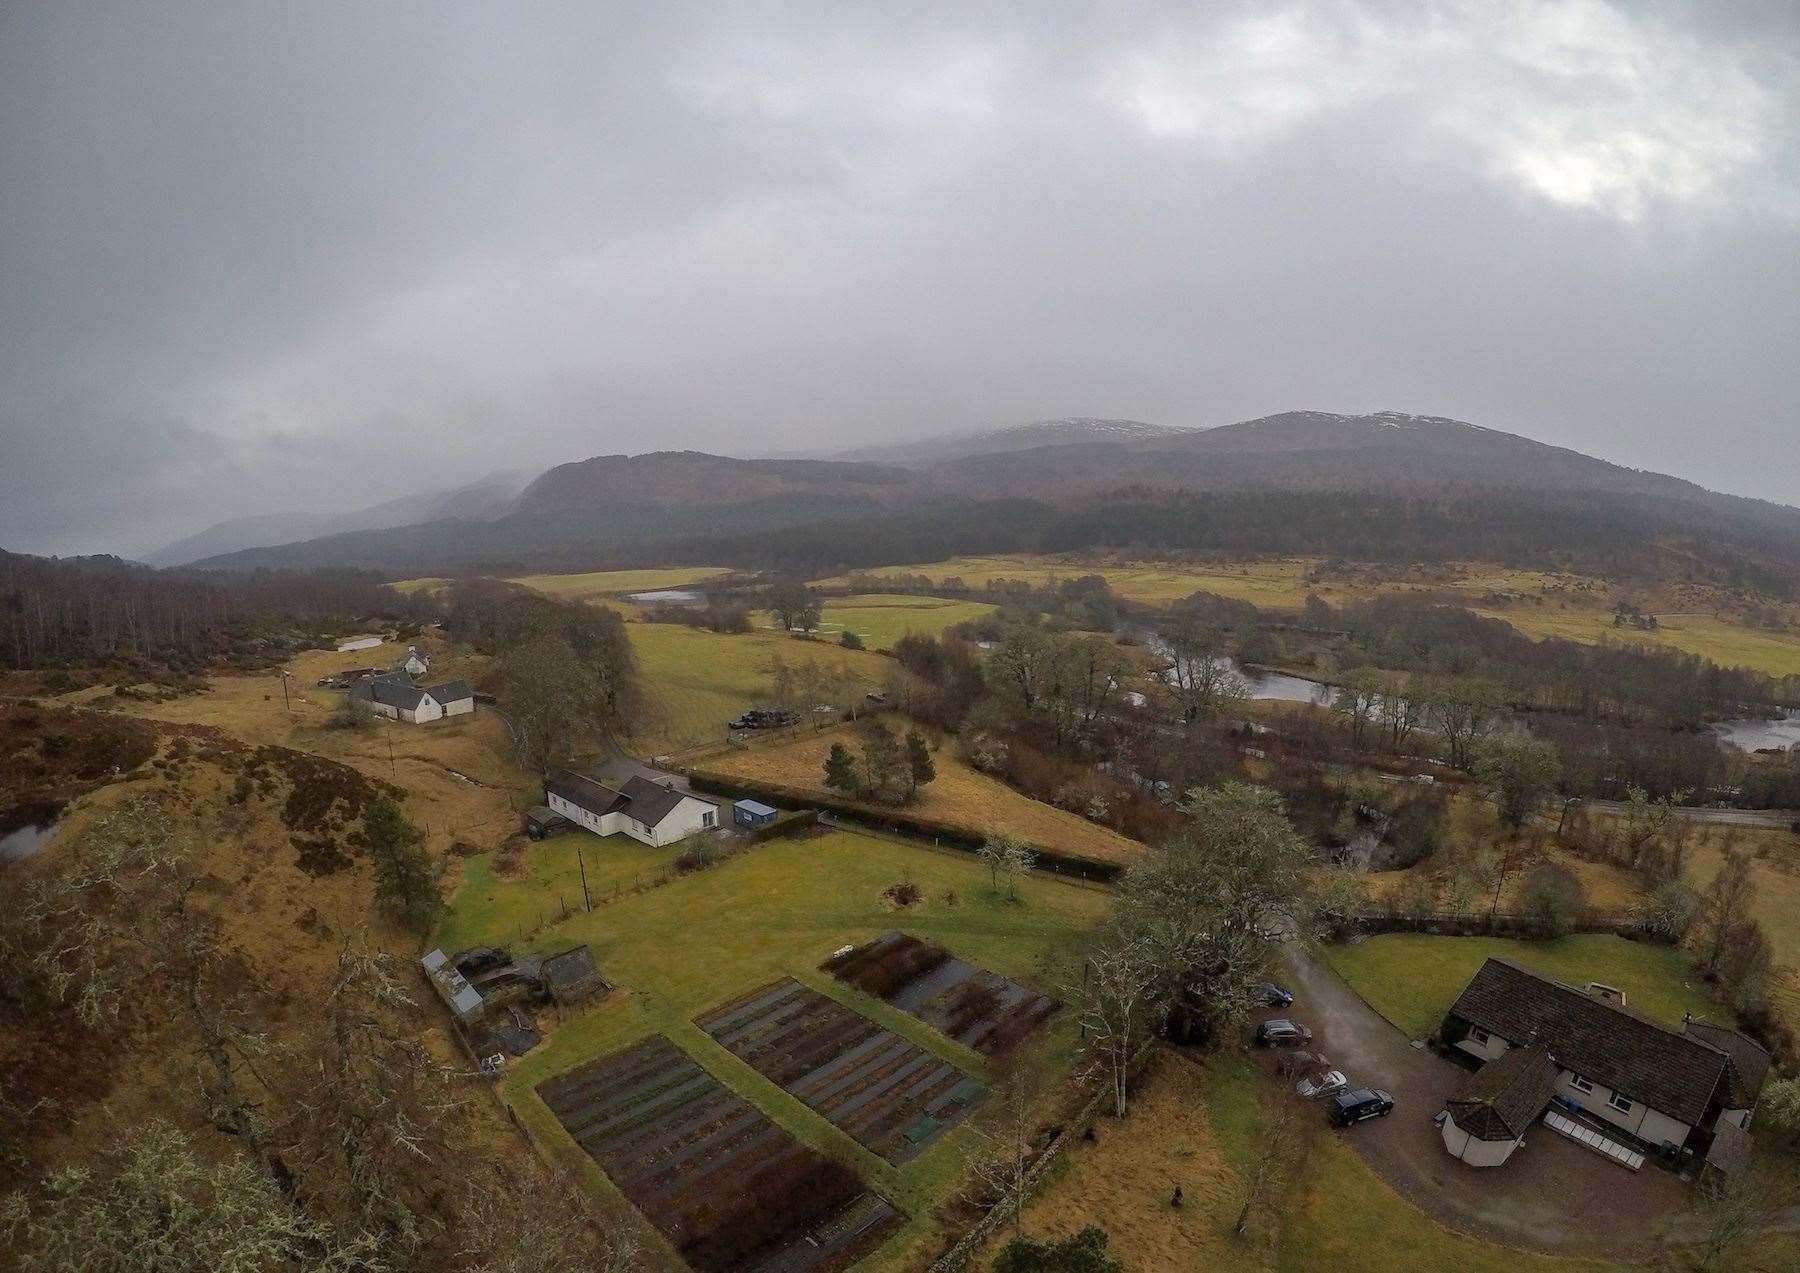 Trees for Life want to create a visitor centre near Loch Ness dedicated to teaching people about the rewilding process.